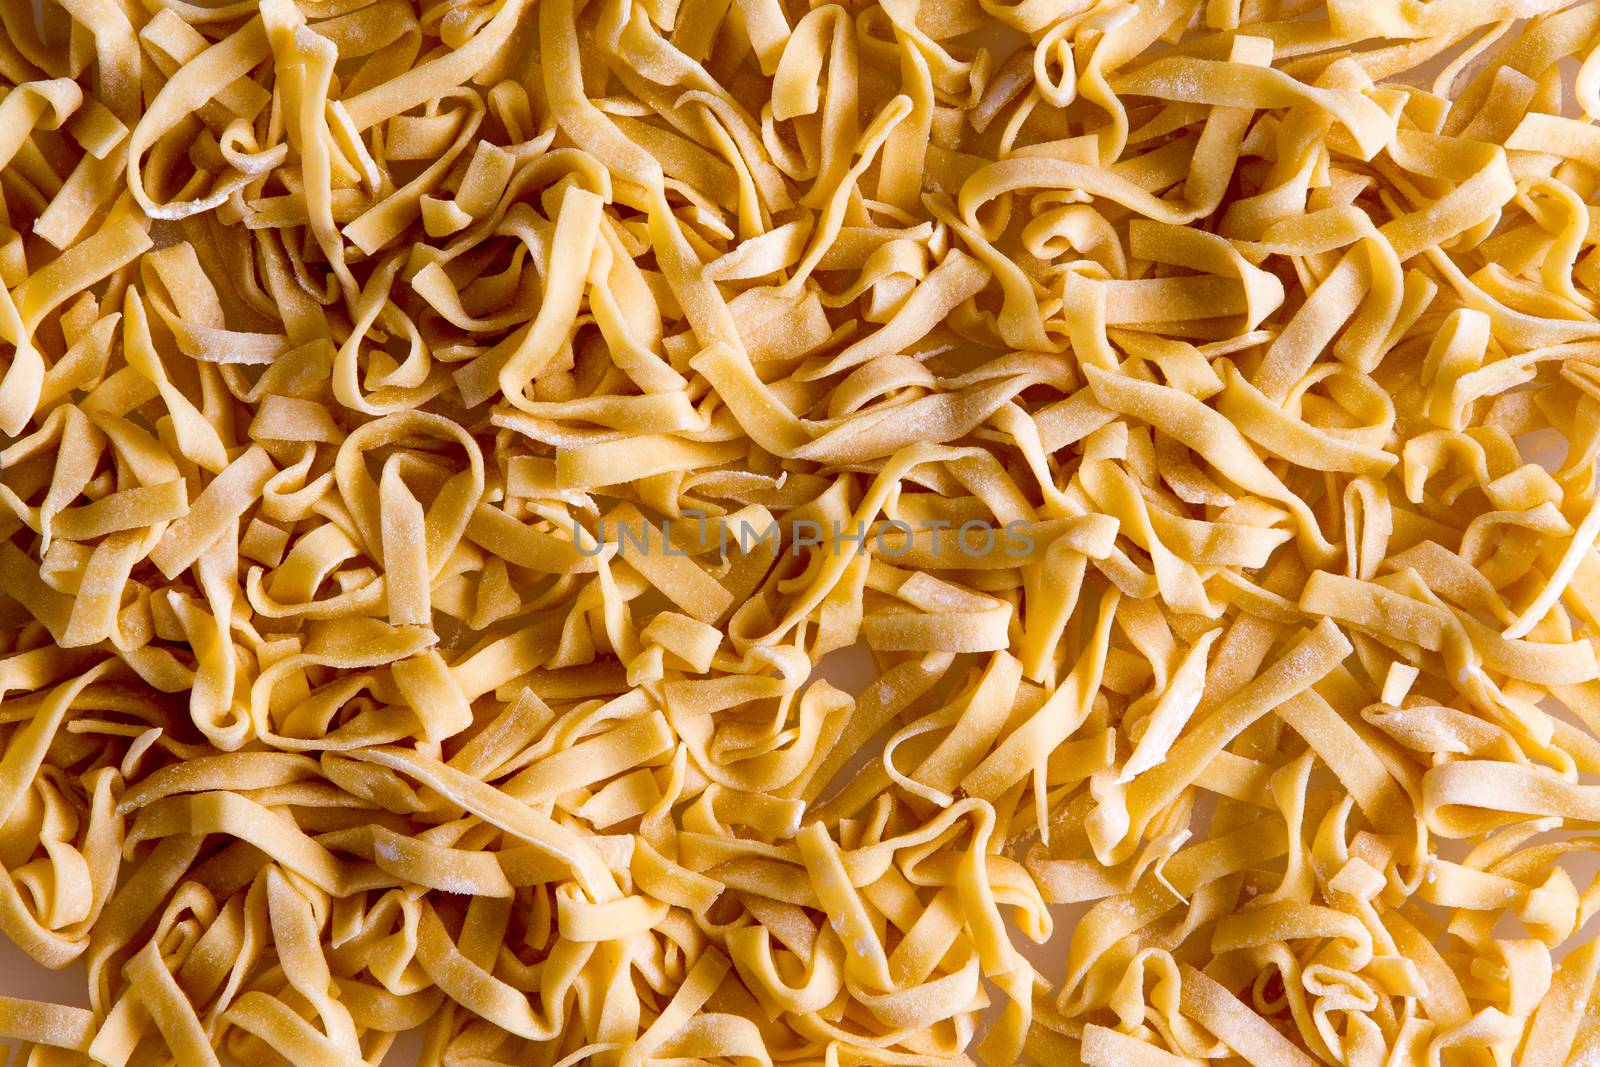 Background of fresh homemade fettuccine pasta noodles in traditional ribbon form made from durum wheat dough, full frame